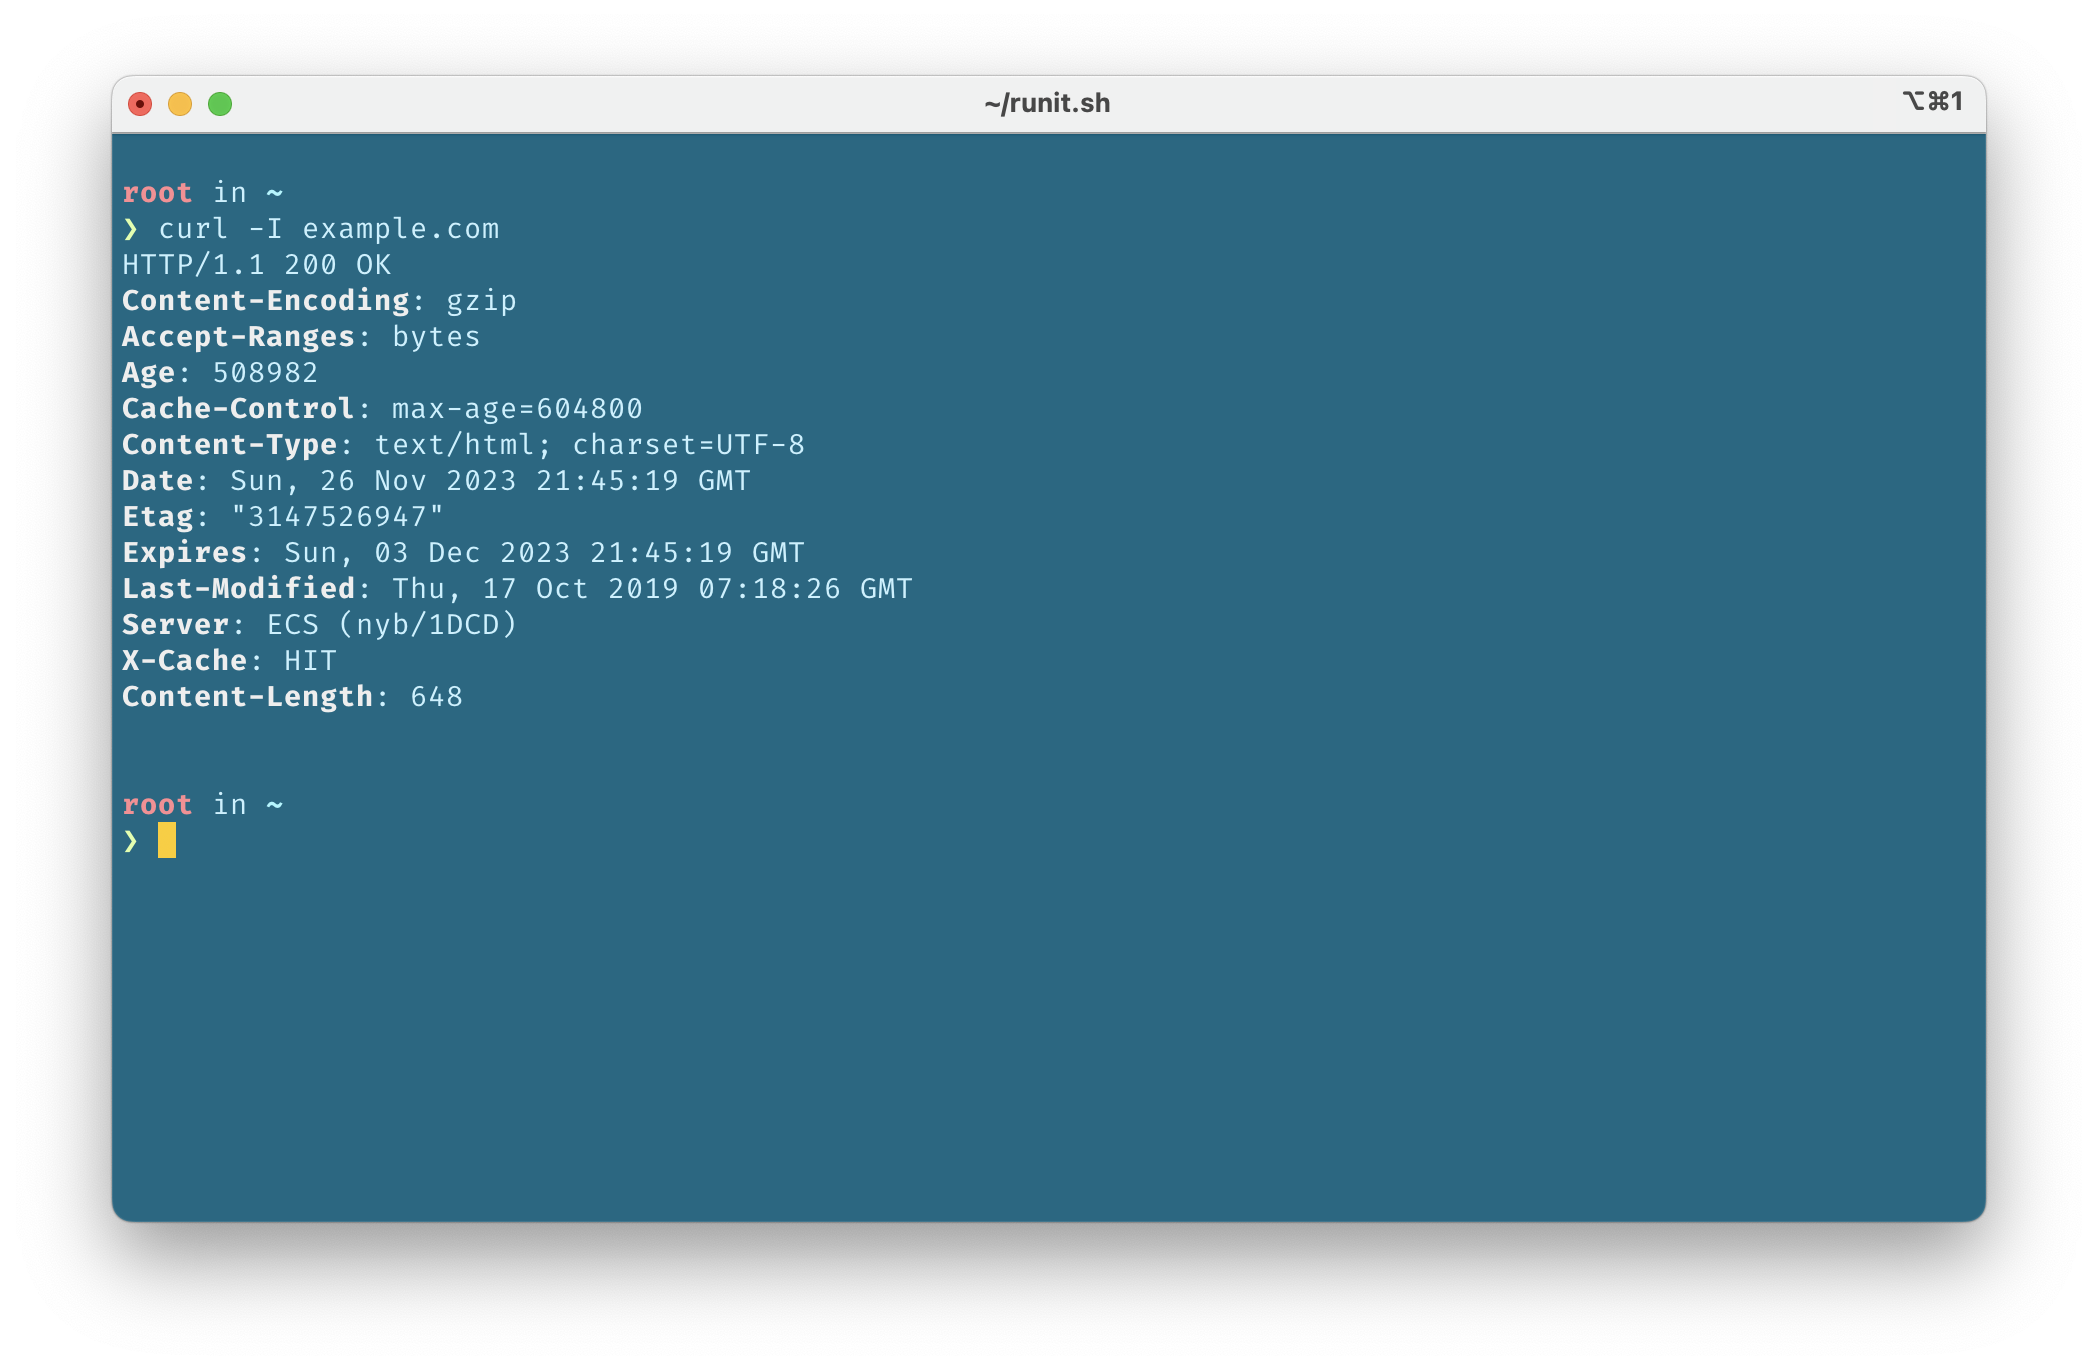 Another screenshot of FreeBSD 13.2-RELEASE for ARM64 console in QEMU on Apple Silicon Mac, this time showing that networking is working and is able to connect over HTTP to the website example.com